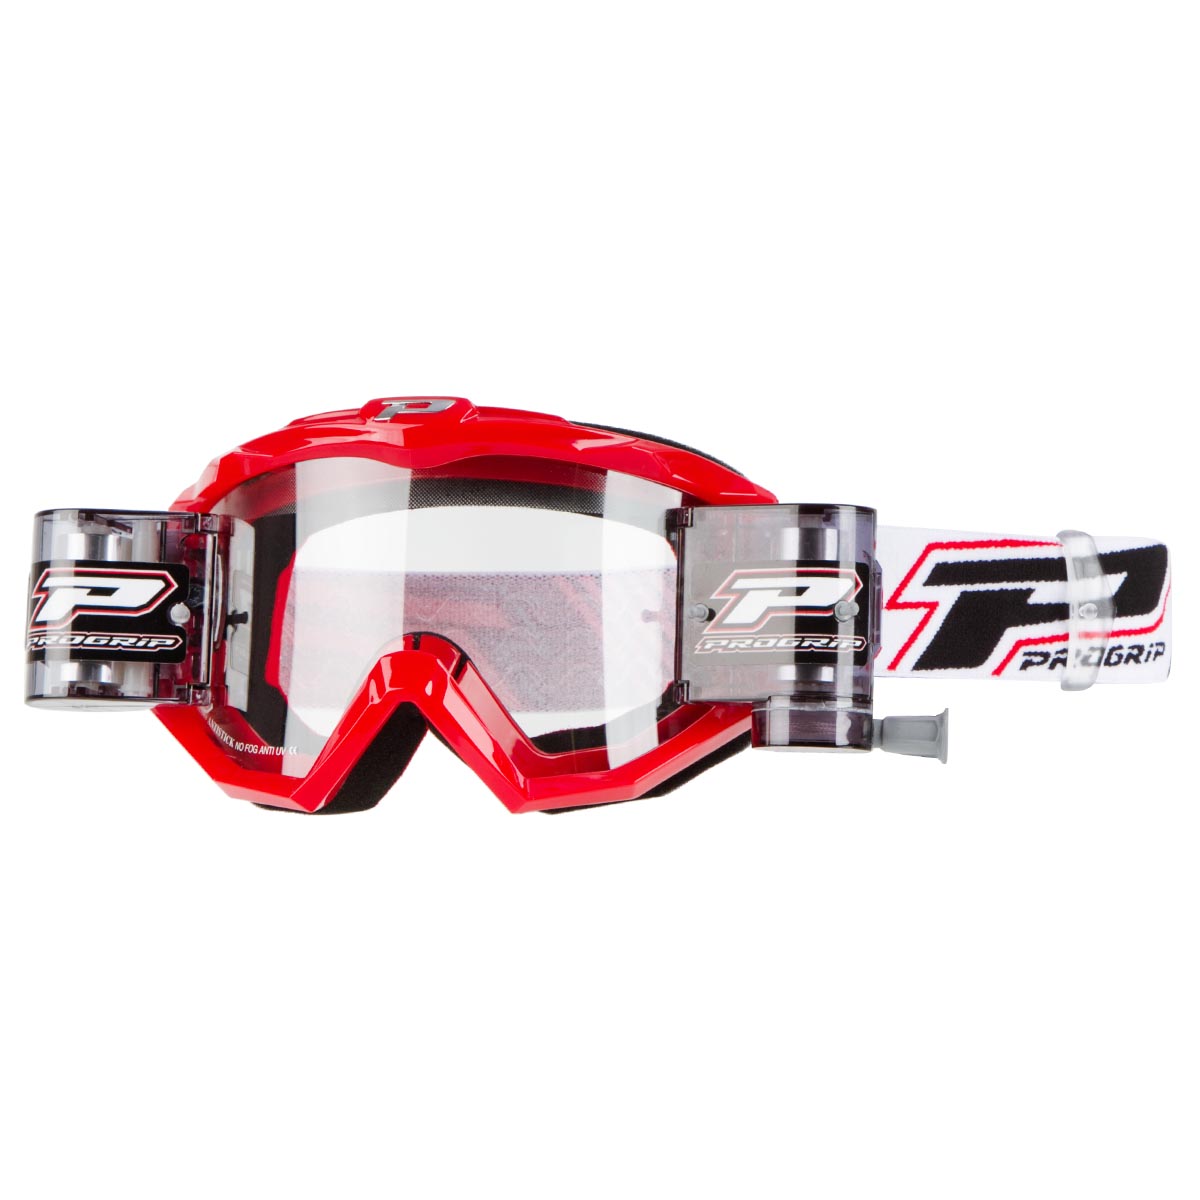 ProGrip Goggle 3201 XL Race Pack inklusive Roll-Off System, Anti Fog